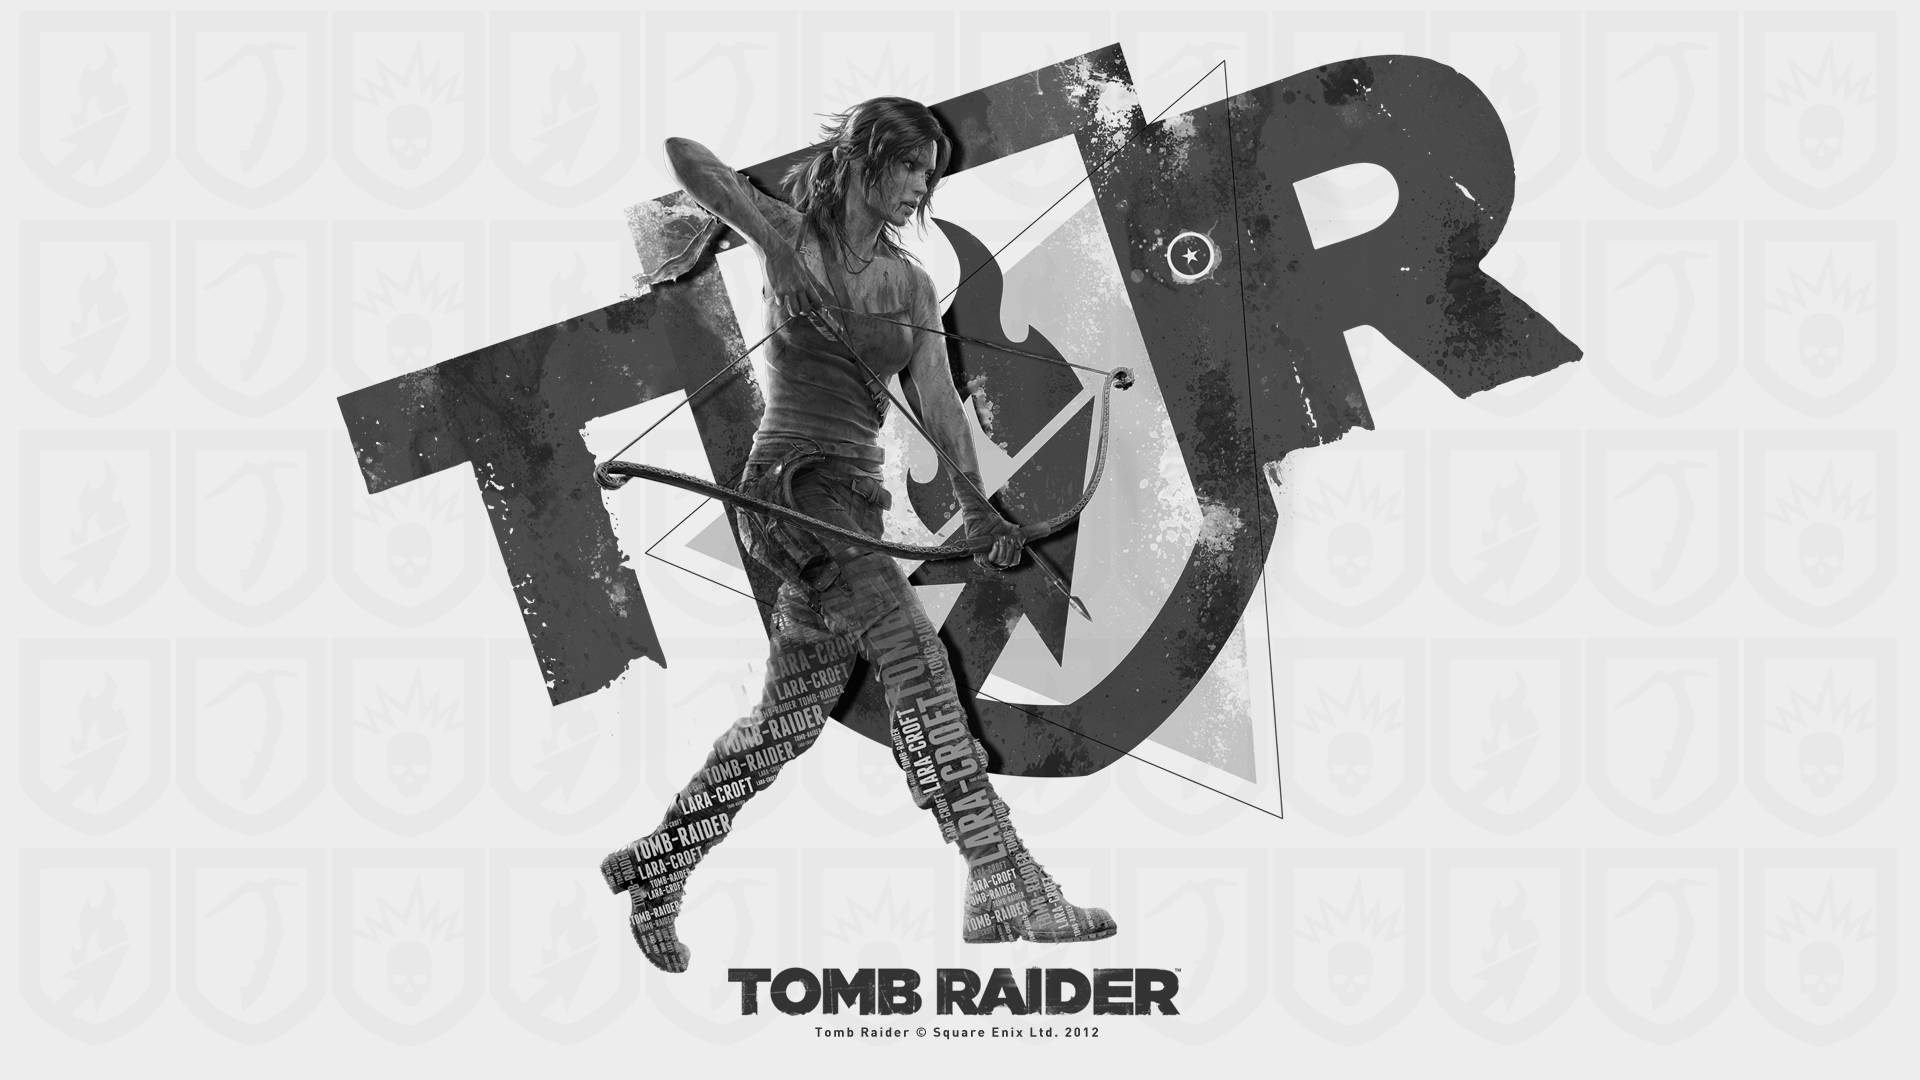 An intense fight scene between Lara Croft and ruthless opponents in Tomb Raider 9. Wallpaper